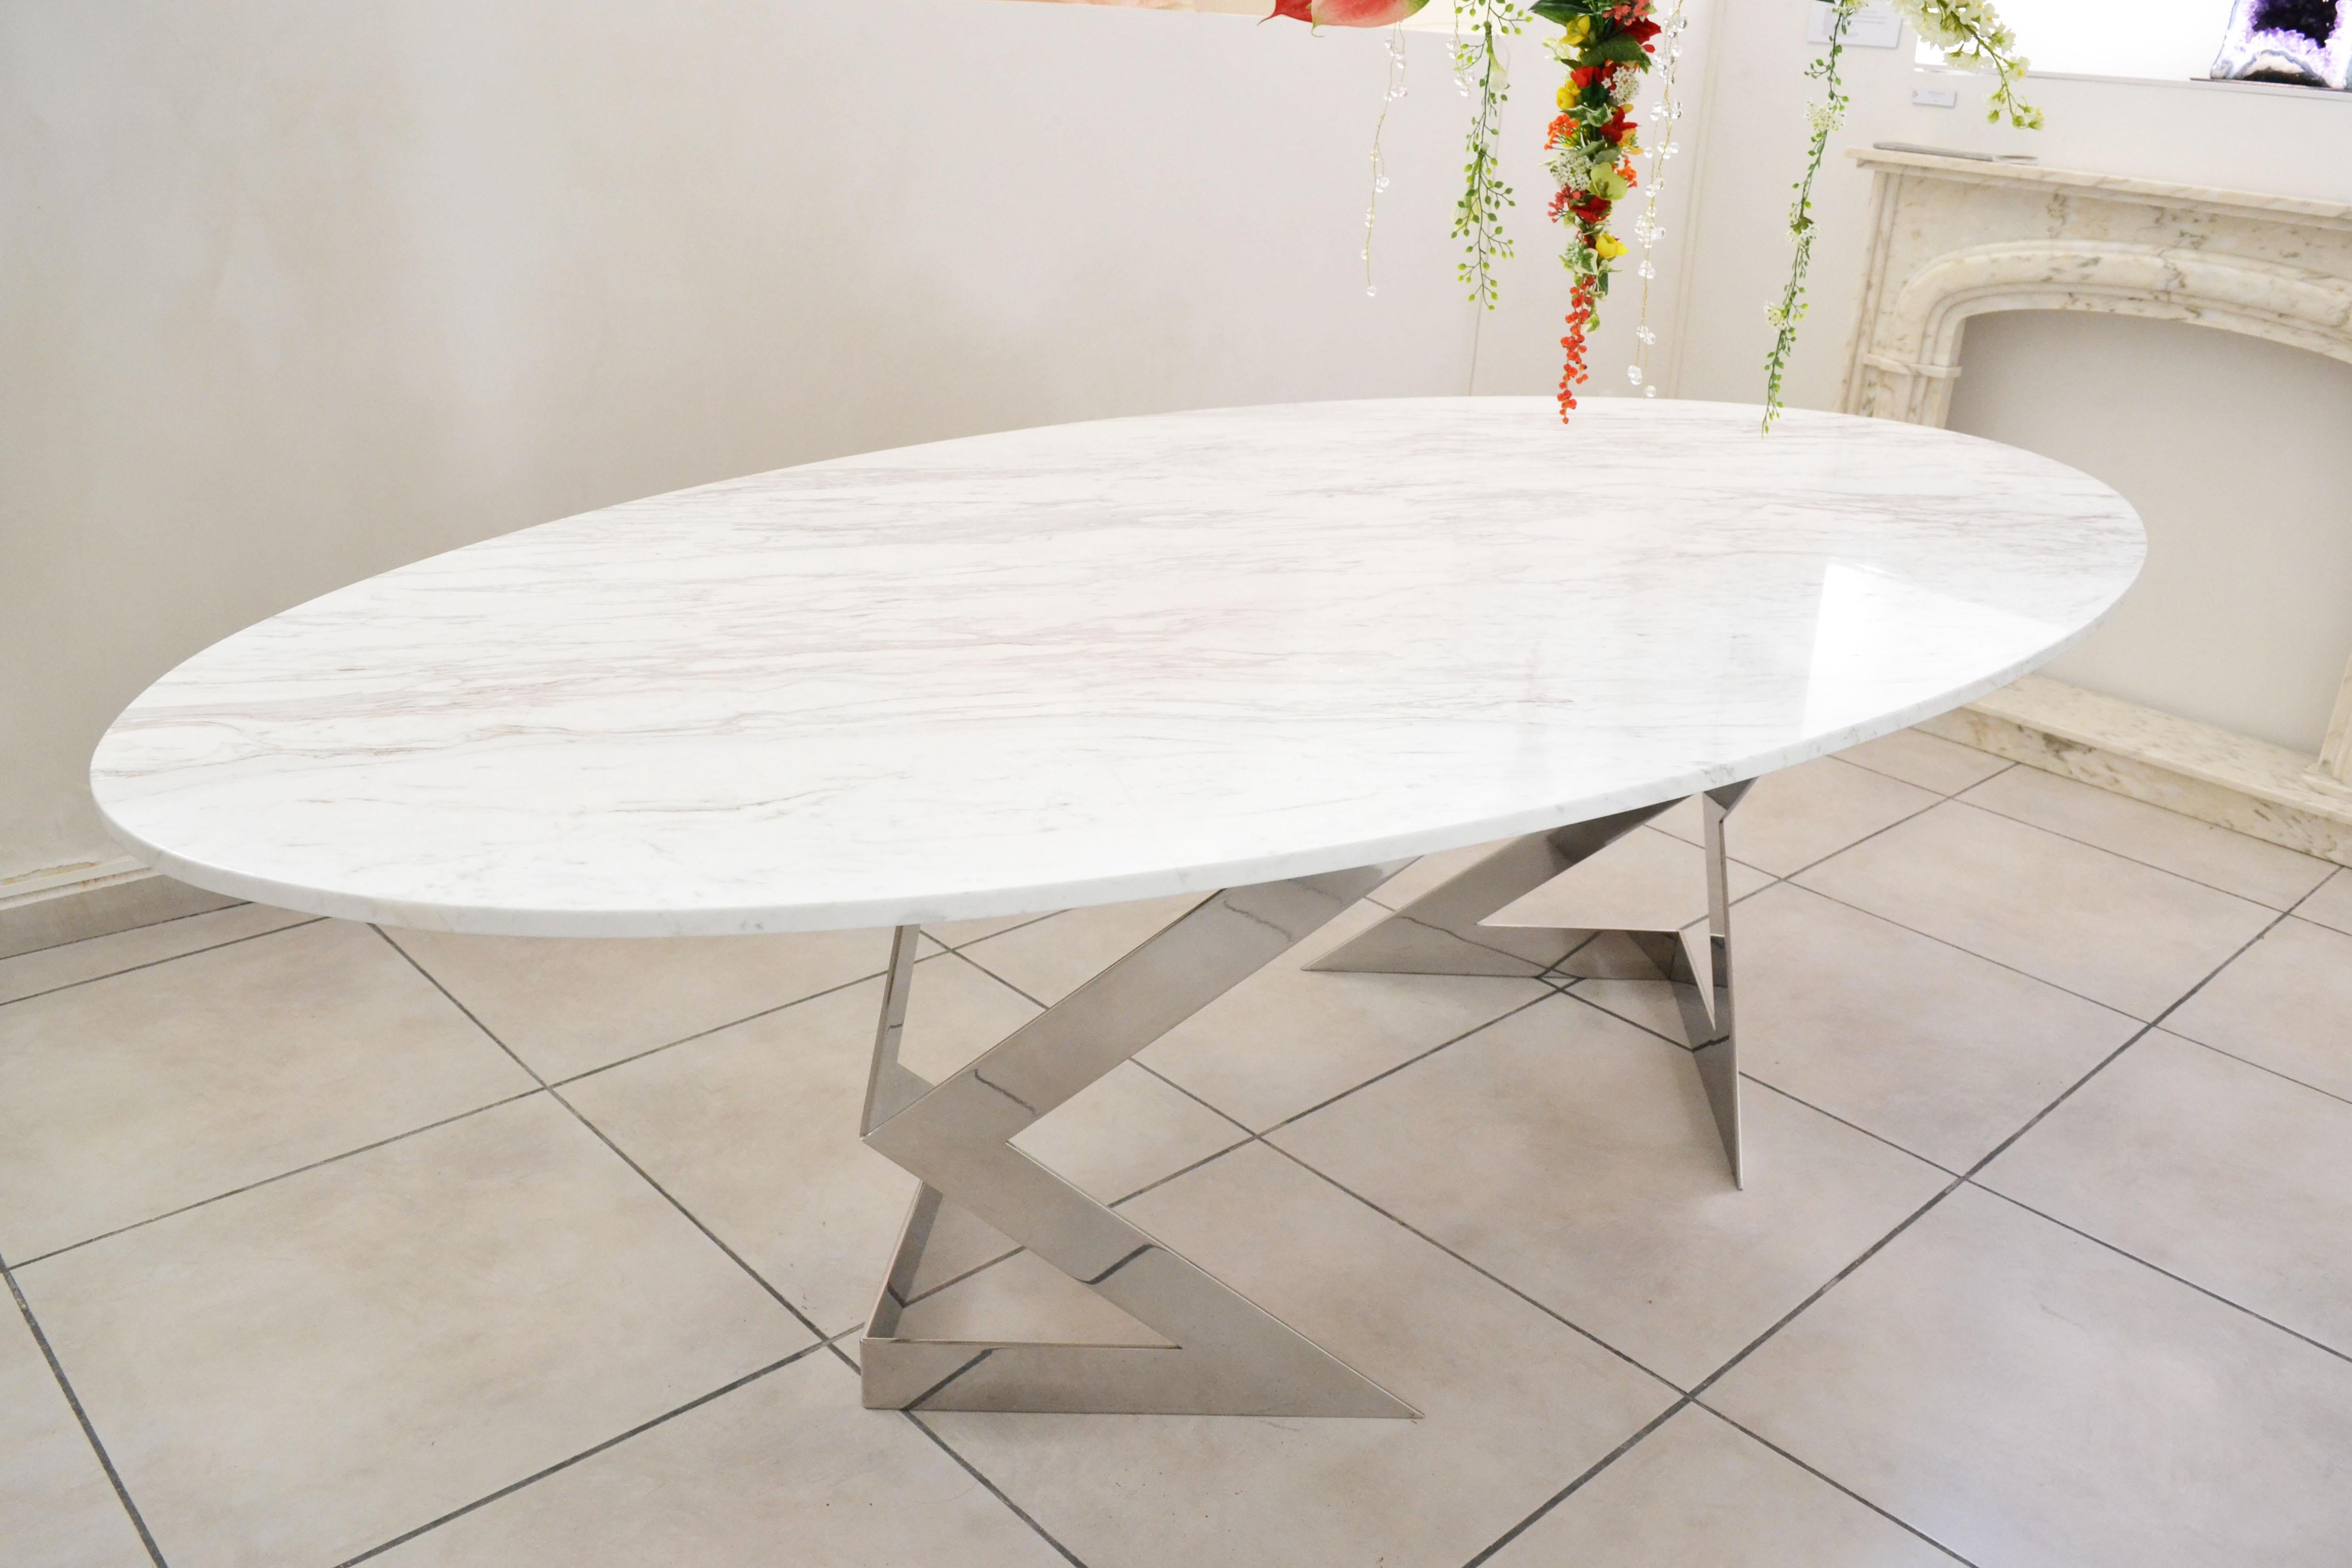 The Ivory Diamond - an oval dining table that focuses on the architectonic of metal in a strong diamond cut shape to bring firmness to the base. 

The Ivory Diamond has a simple design but is full of grace. 

Great craftsmanship was combined with